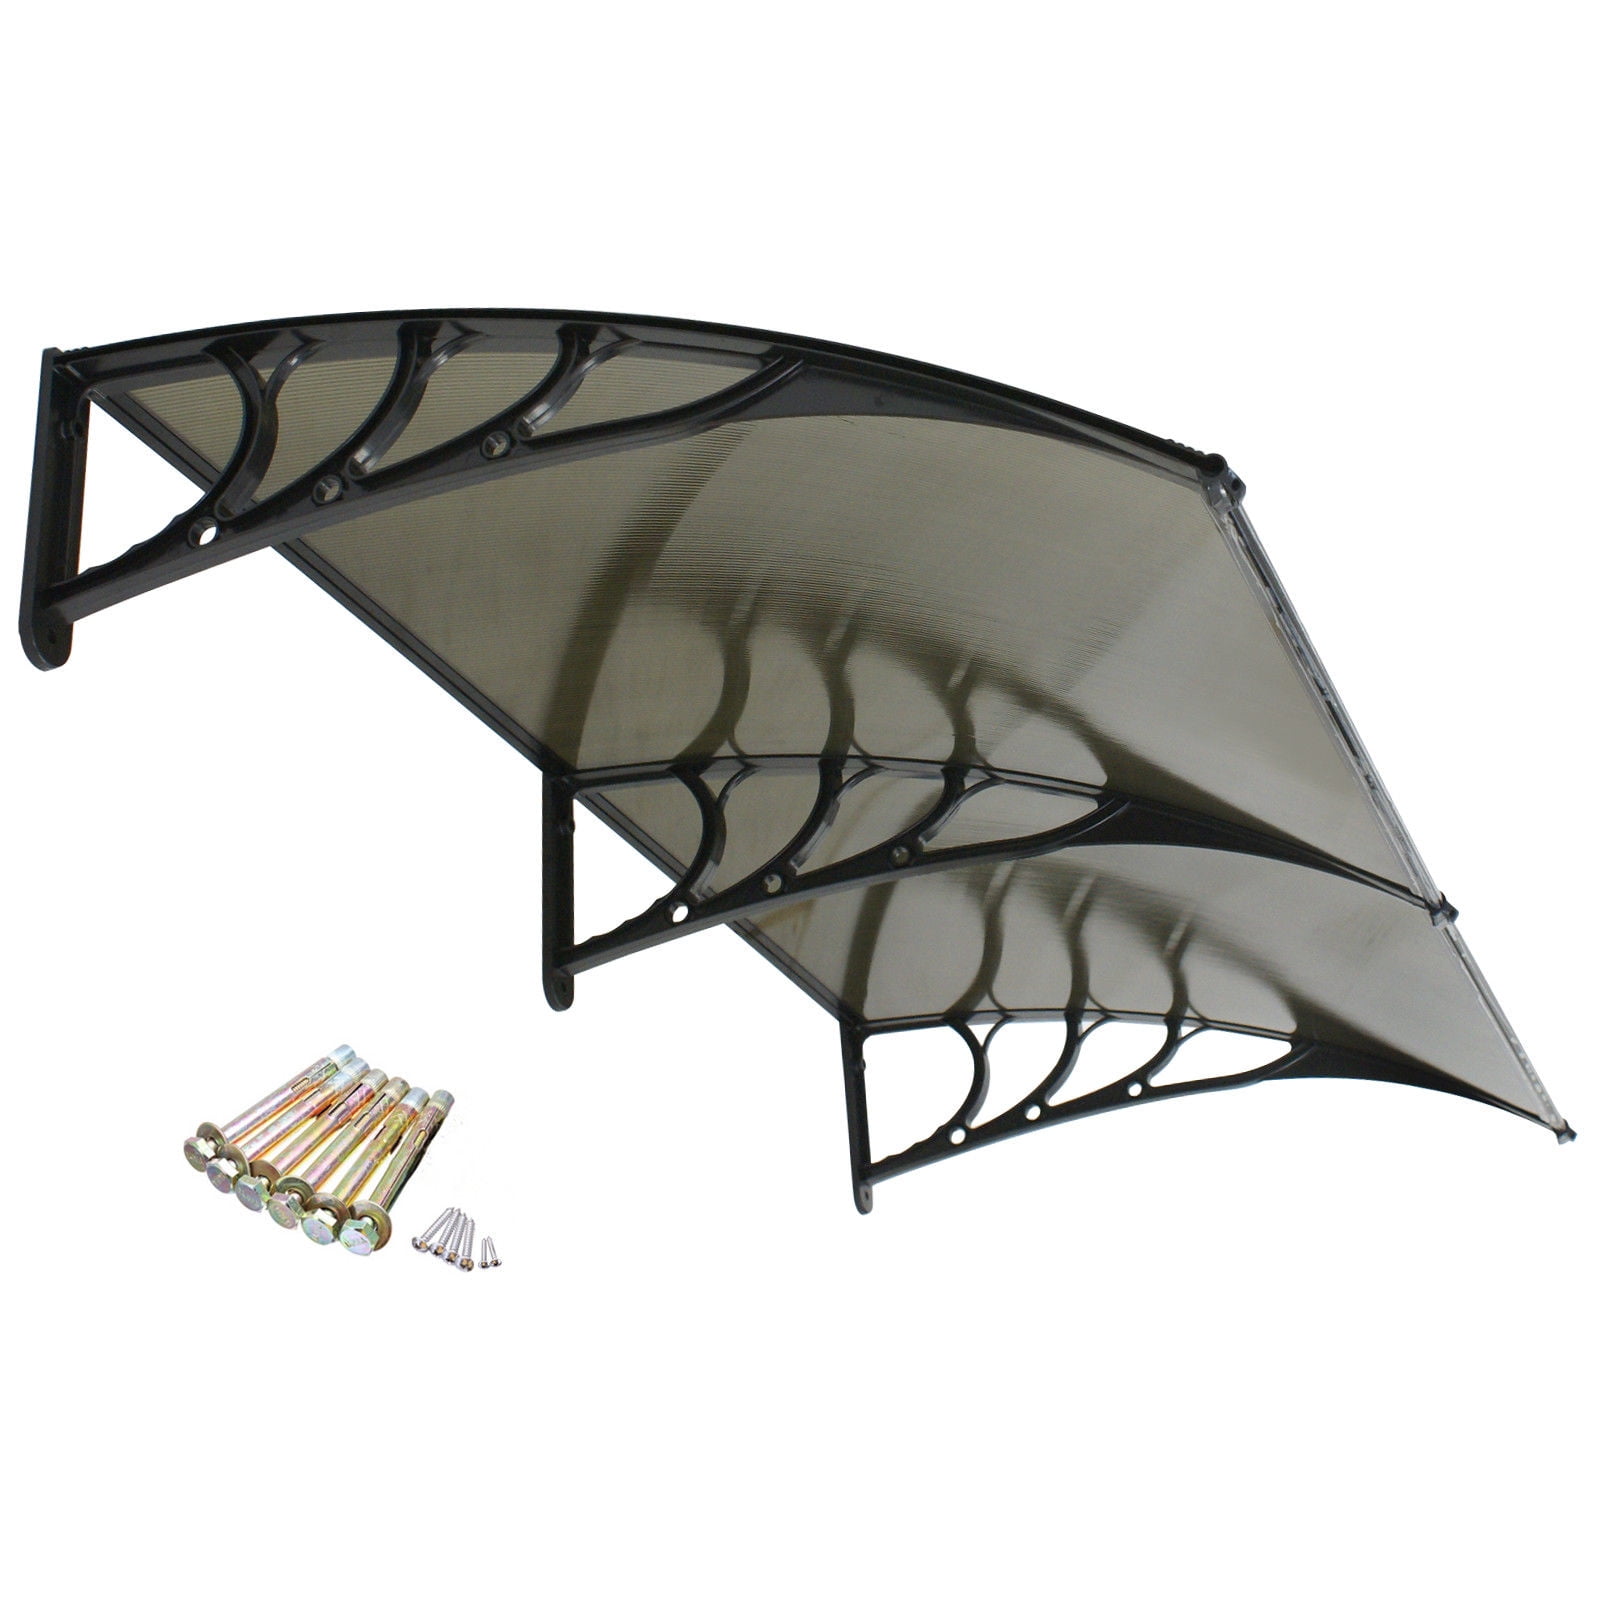 4 Colors Options Door Canopy Porch Shelter,Rain Snow Protection Door Rain Shelter Suitable for Front Porch Cover Sheets